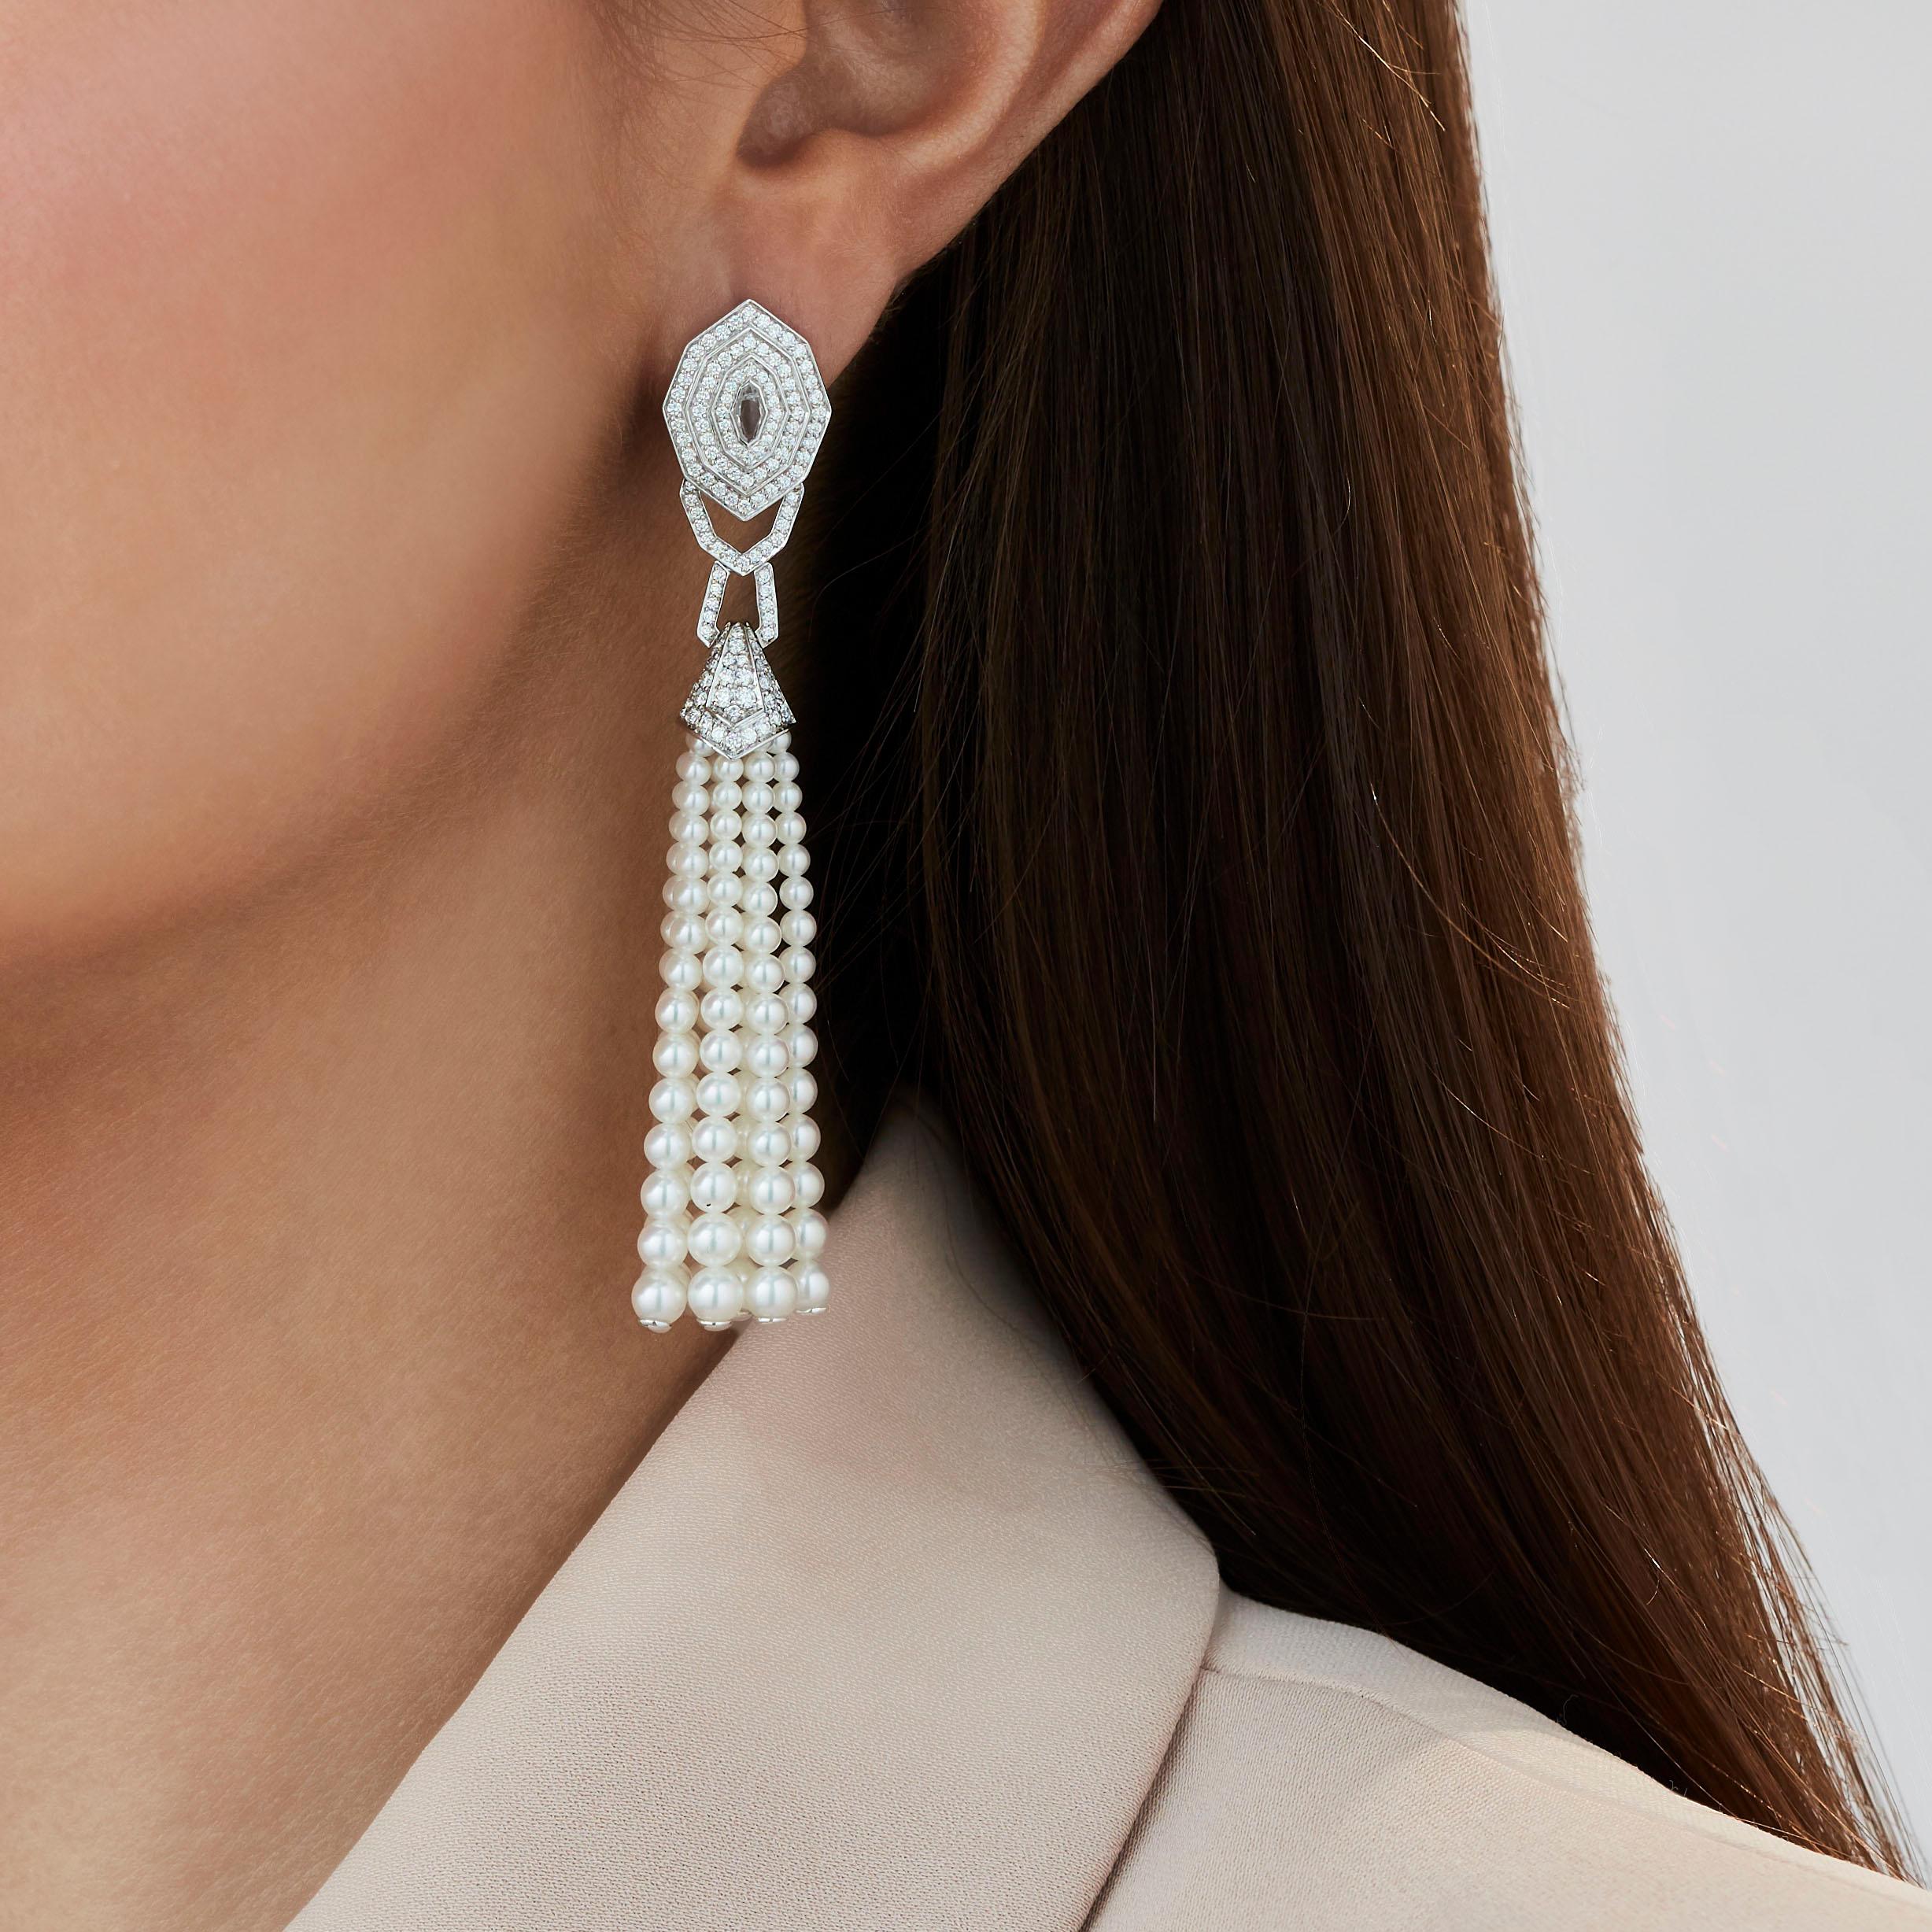 A House of Garrard pair of 18 karat white gold tassel earrings from the 'Enchanted Palace' collection, set with round white diamonds, white cultured pearls and rock crystals.

258 round white diamonds weighing: 1.38cts
14 strands of white cultured